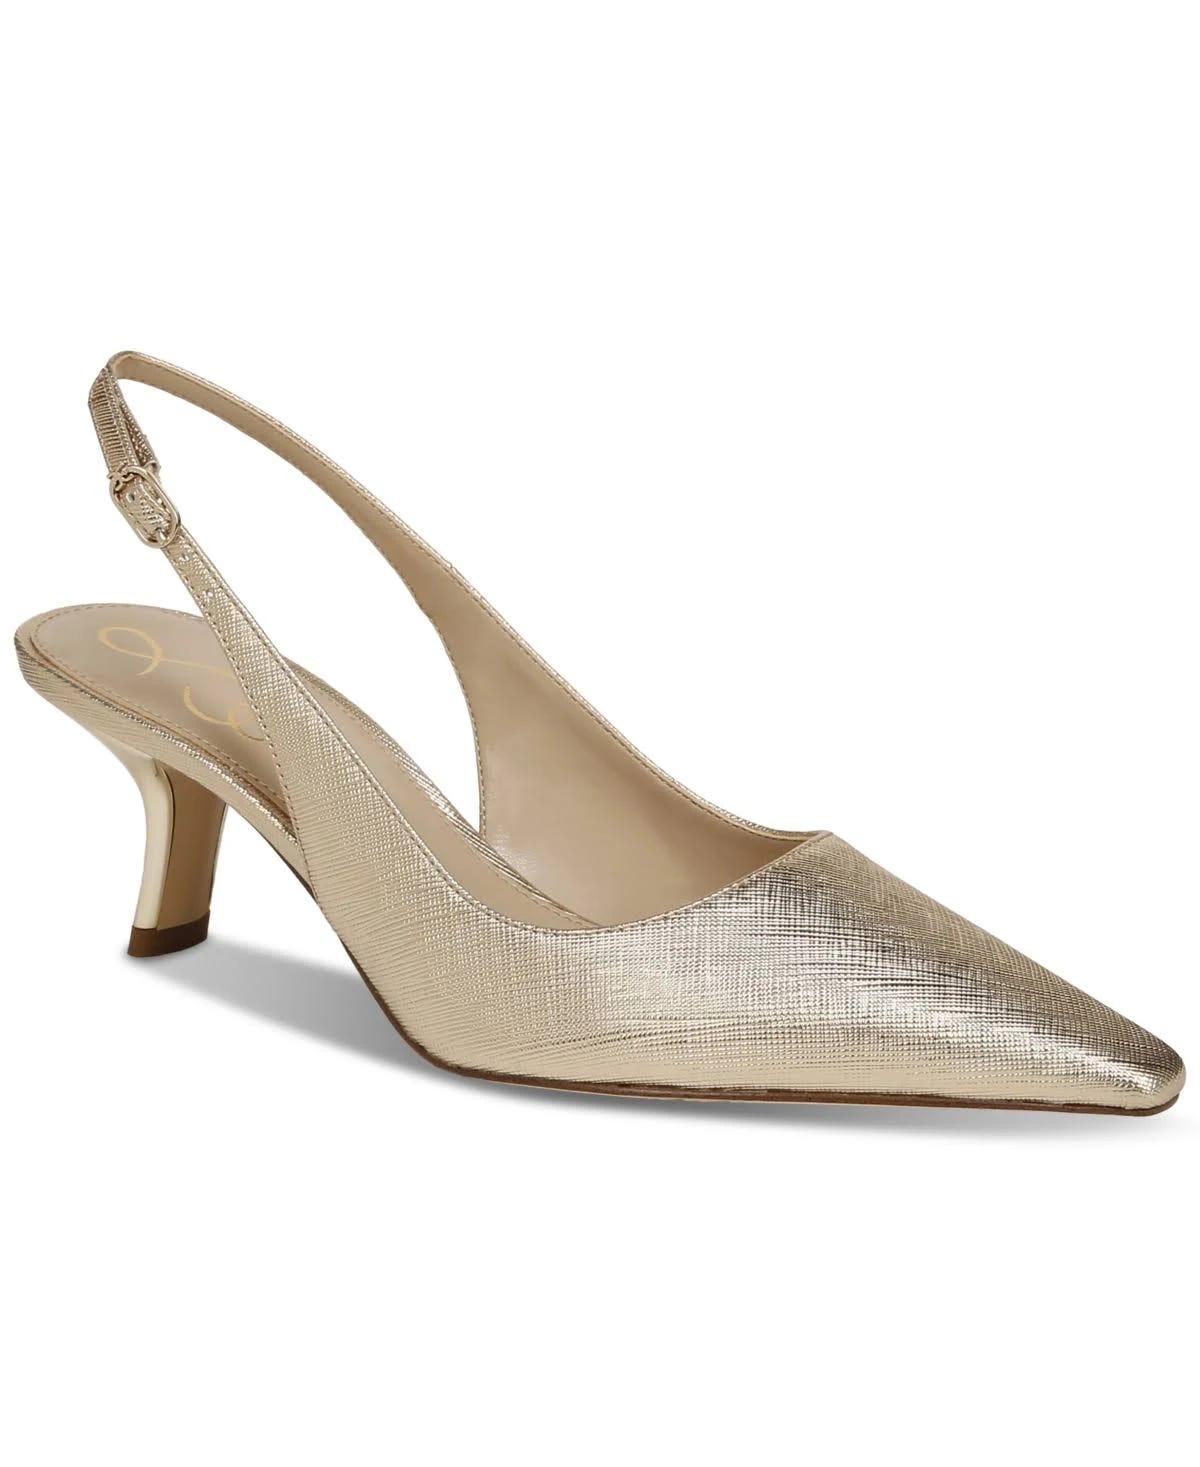 Gold Slingback Pumps for an Elegant Touch | Image